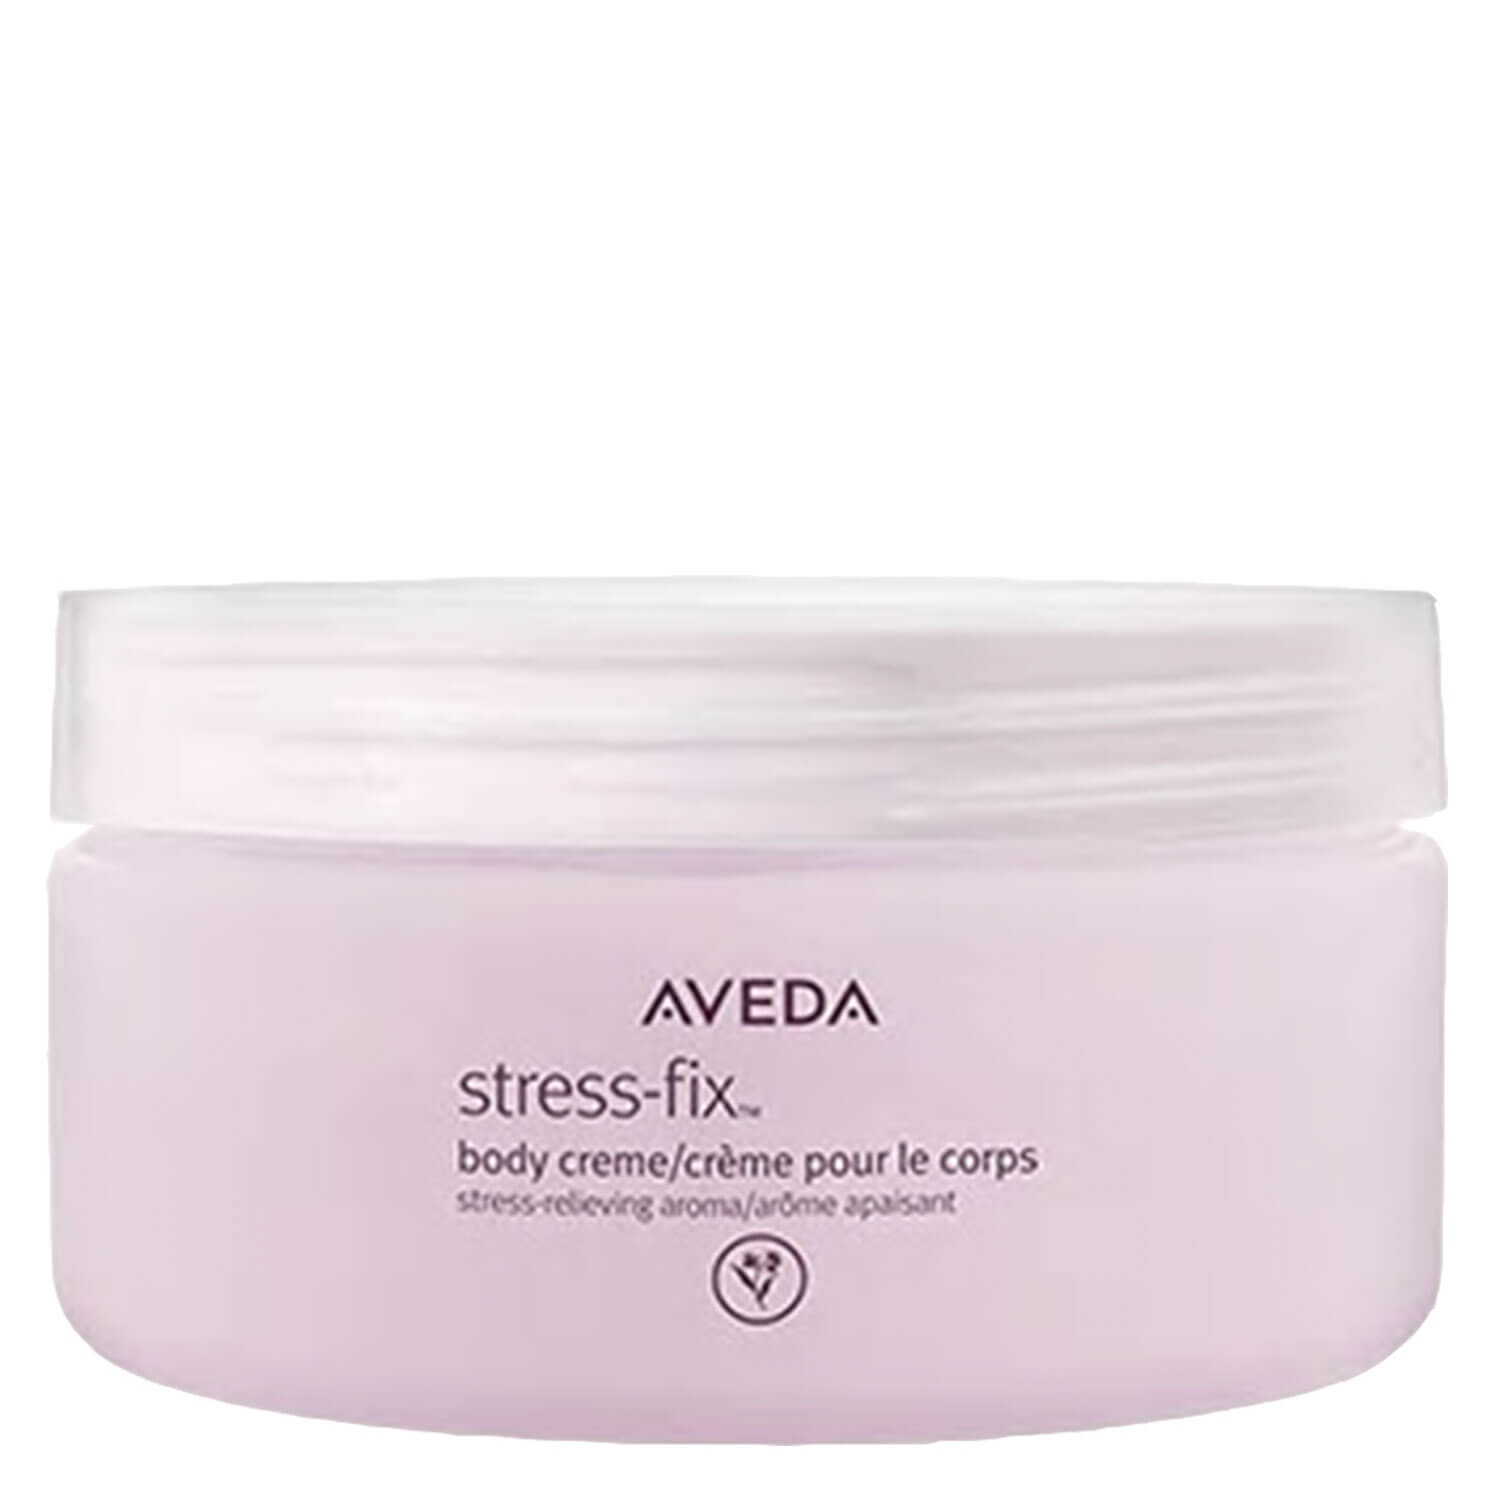 Product image from stress-fix - body creme